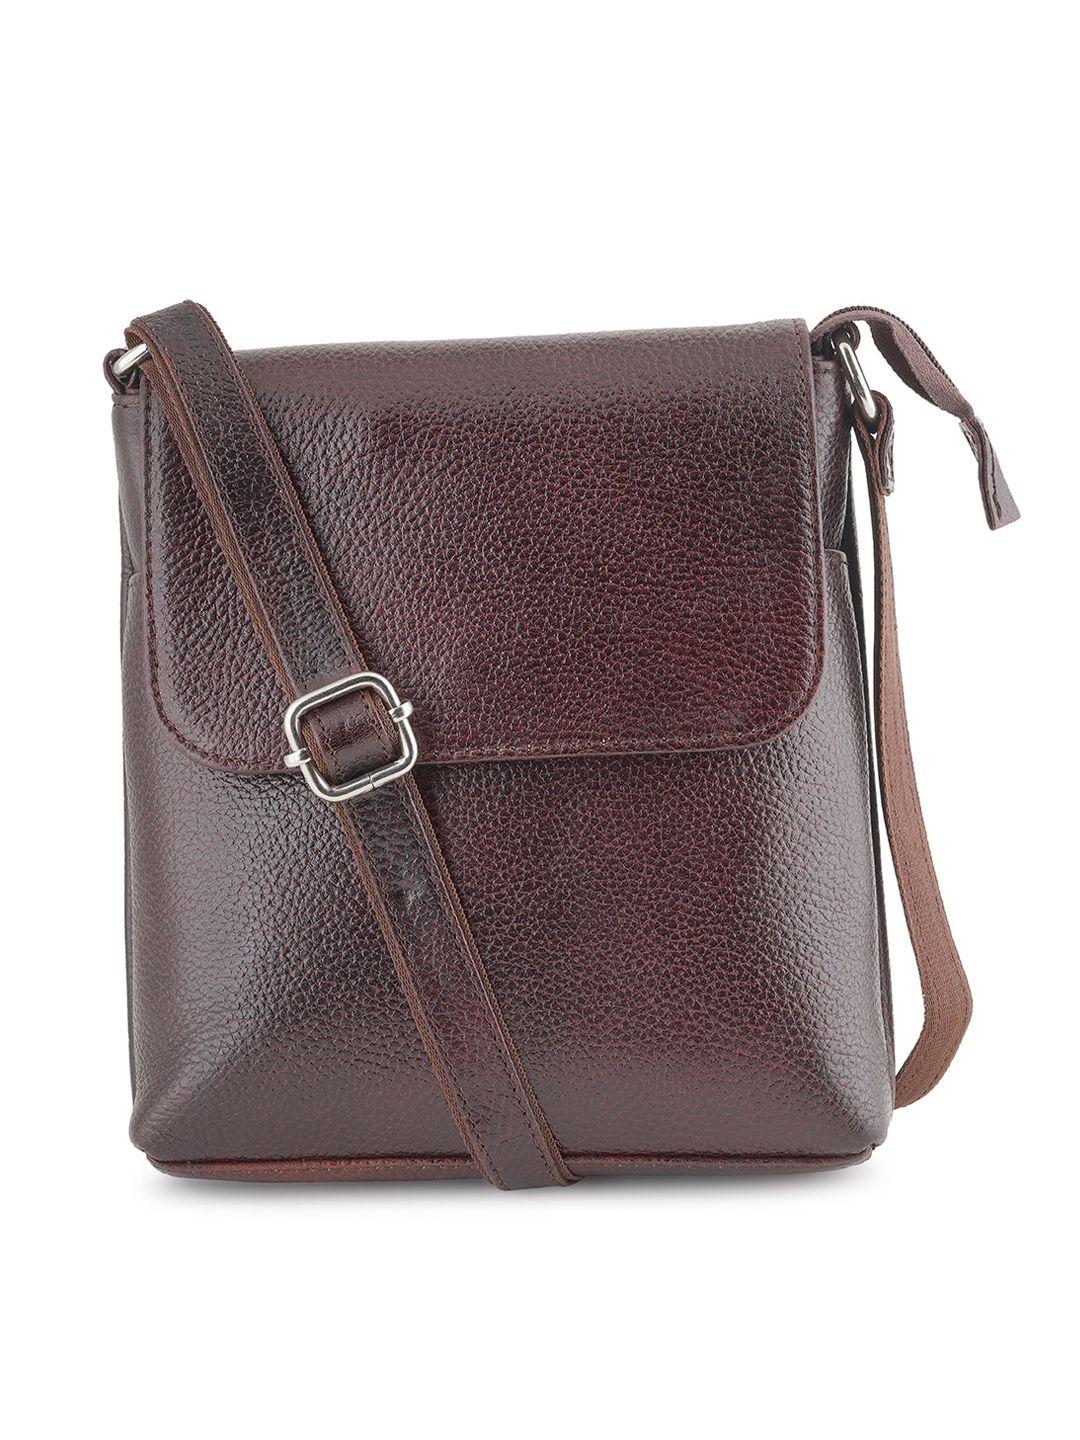 style shoes textured leather structured sling bag